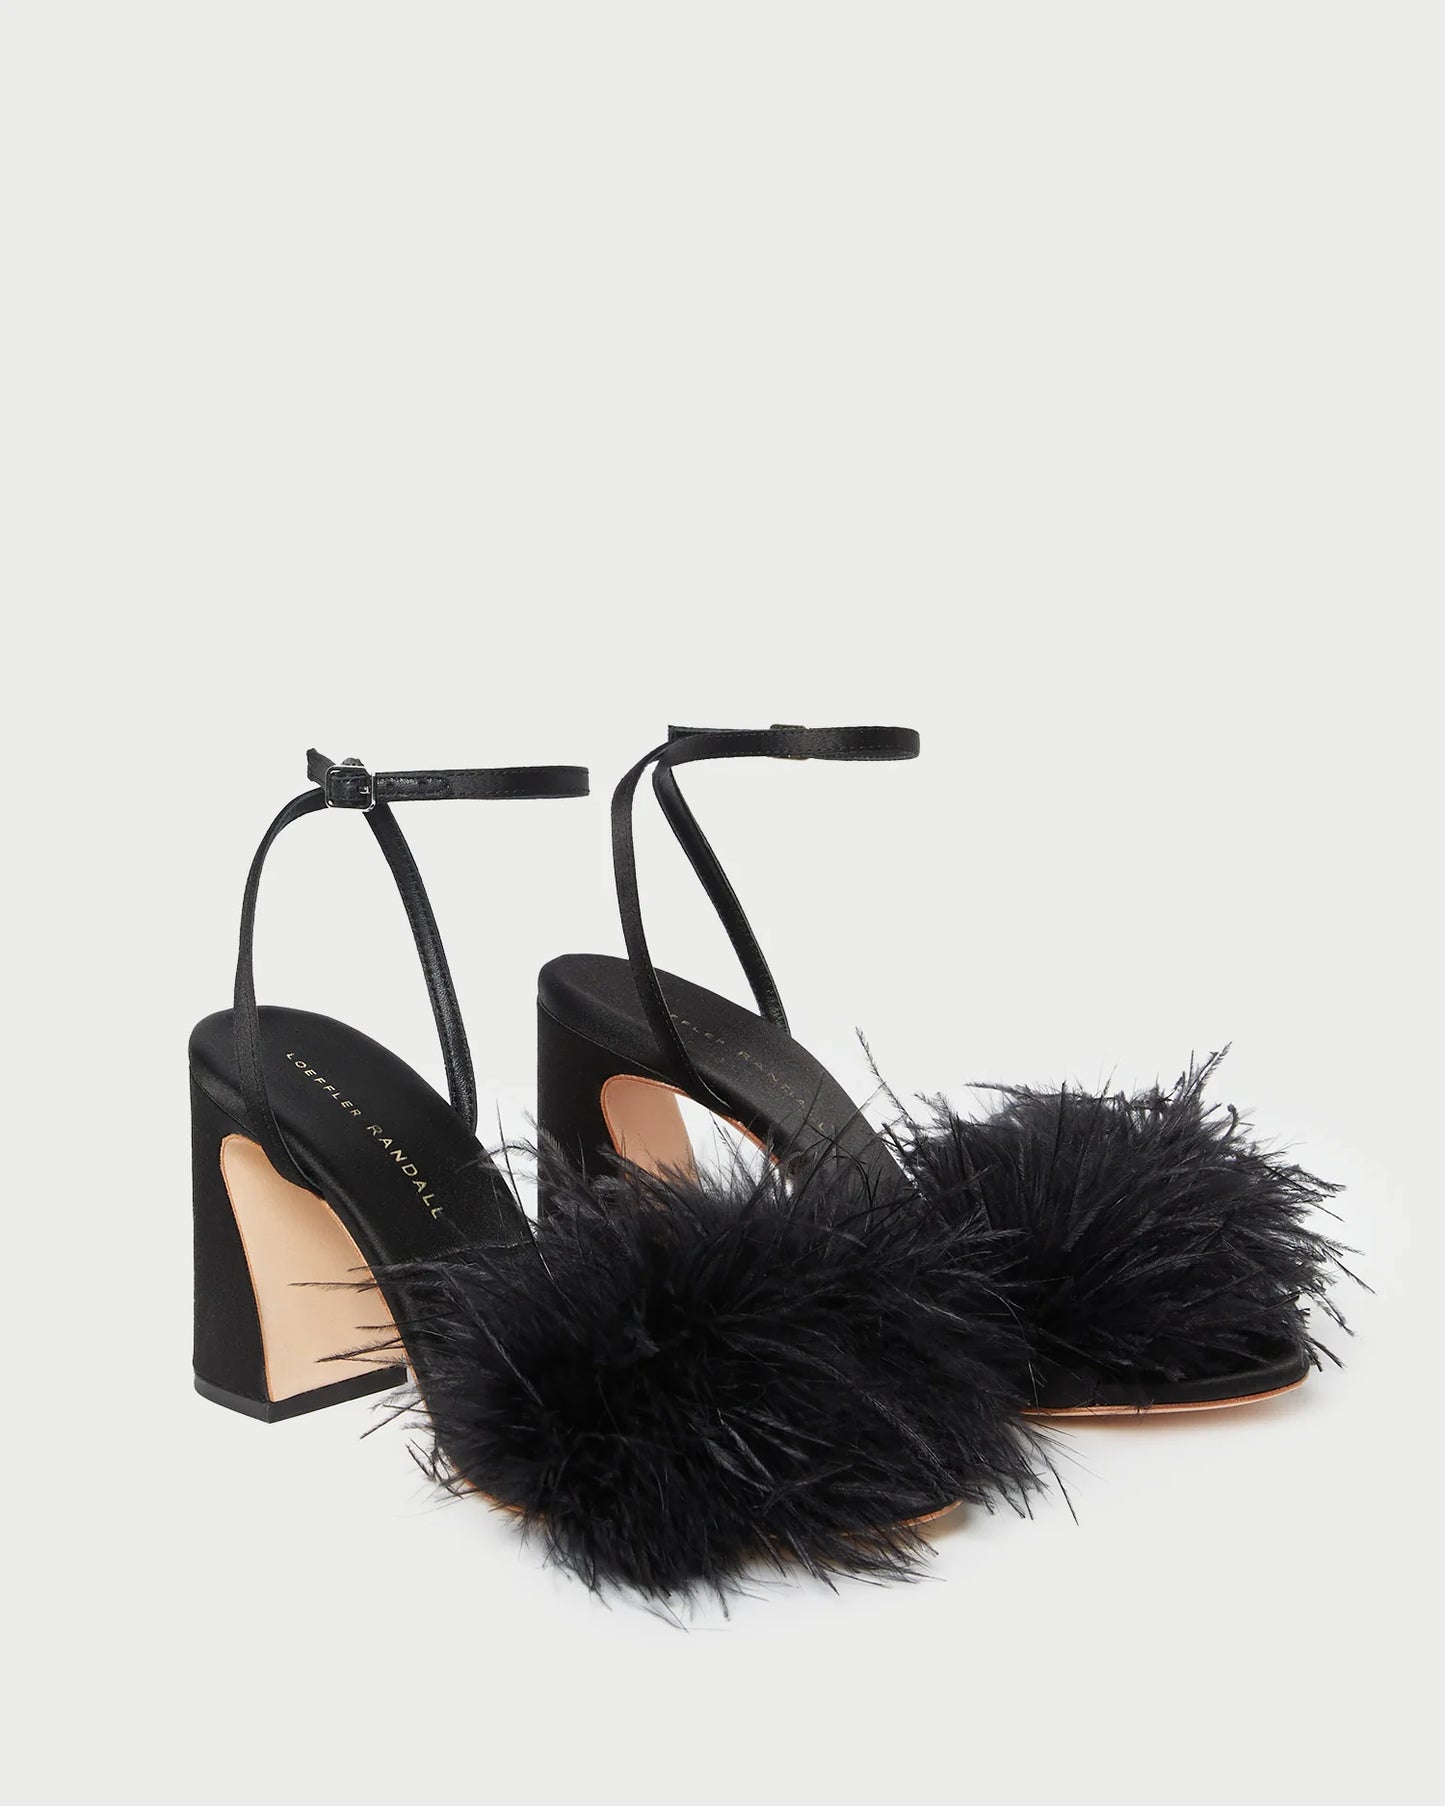 MINERVA SIMPLE SANDAL WITH FEATHERS